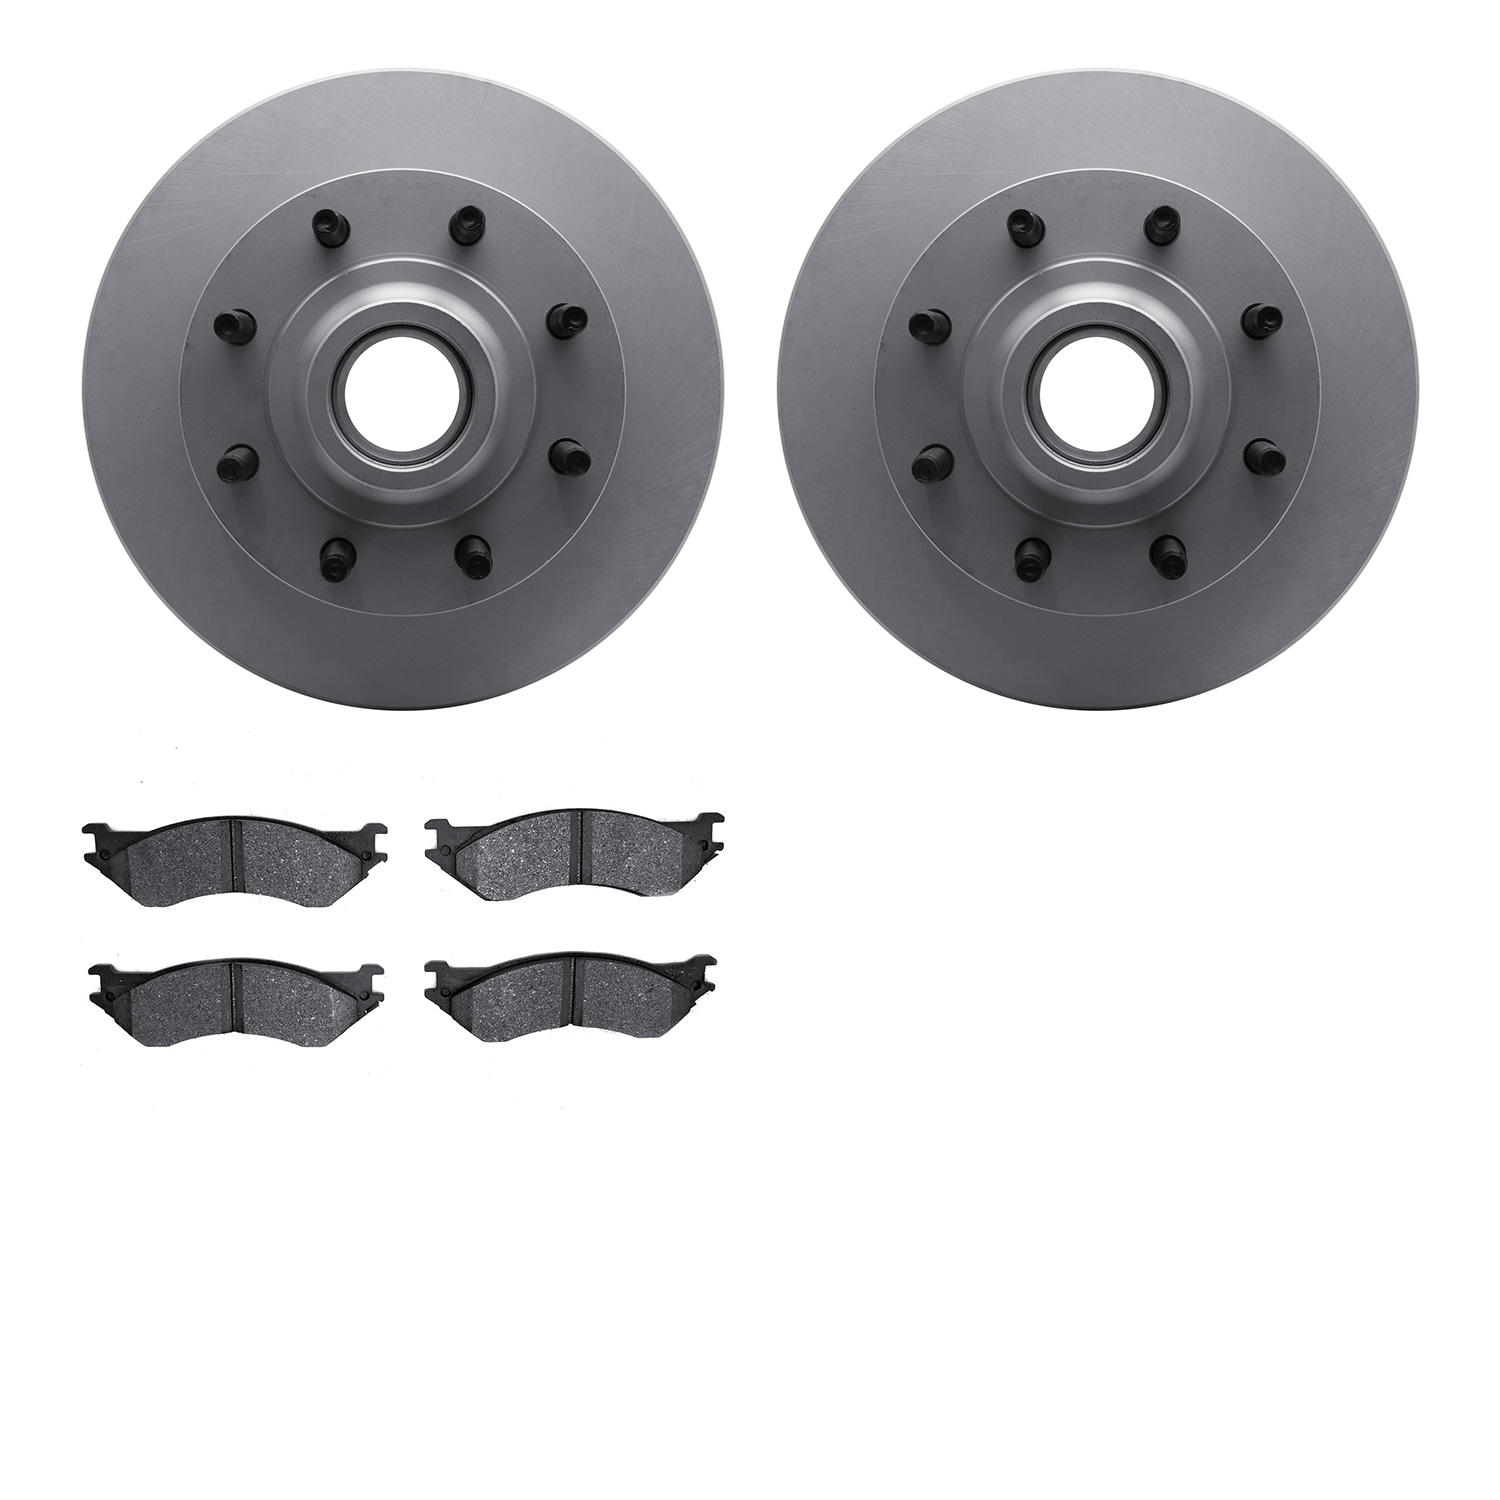 4402-54010 Geospec Brake Rotors with Ultimate-Duty Brake Pads Kit, 2000-2004 Ford/Lincoln/Mercury/Mazda, Position: Front